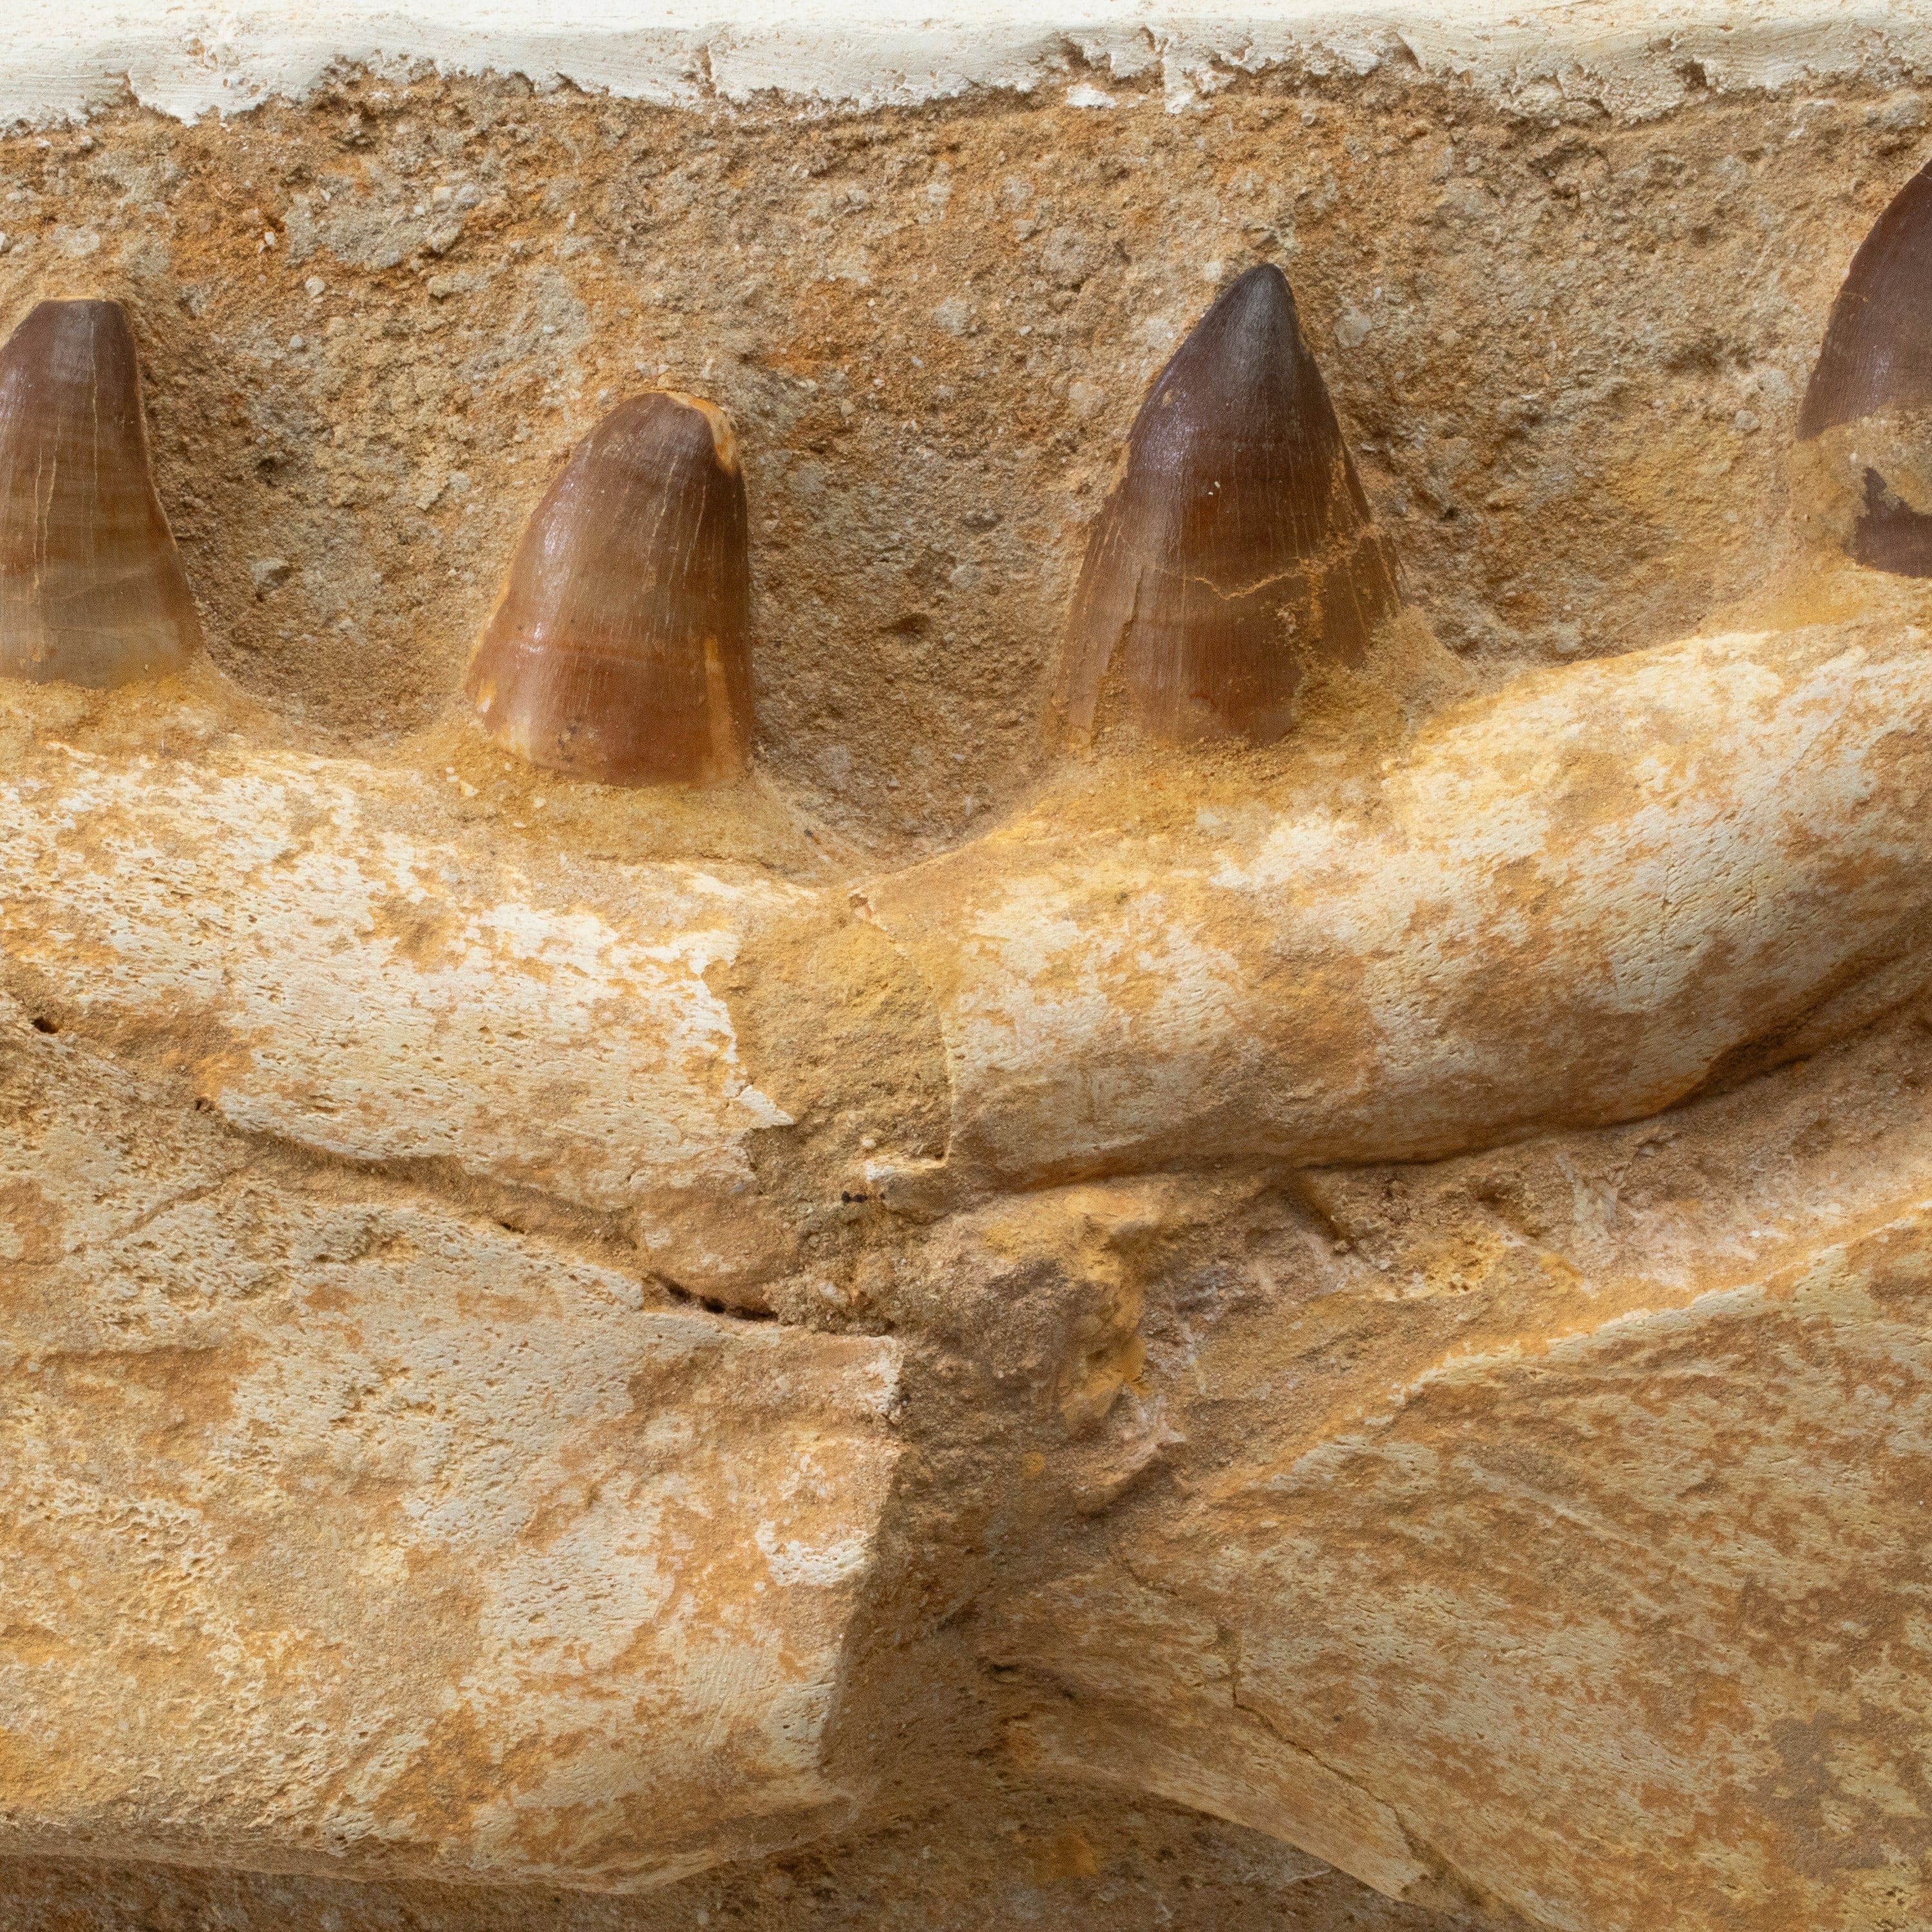 Kalifano Mosasaurus Fossils Mosasaurus Jaw and Teeth Fossil in Matrix - 23in. MOST7600.002